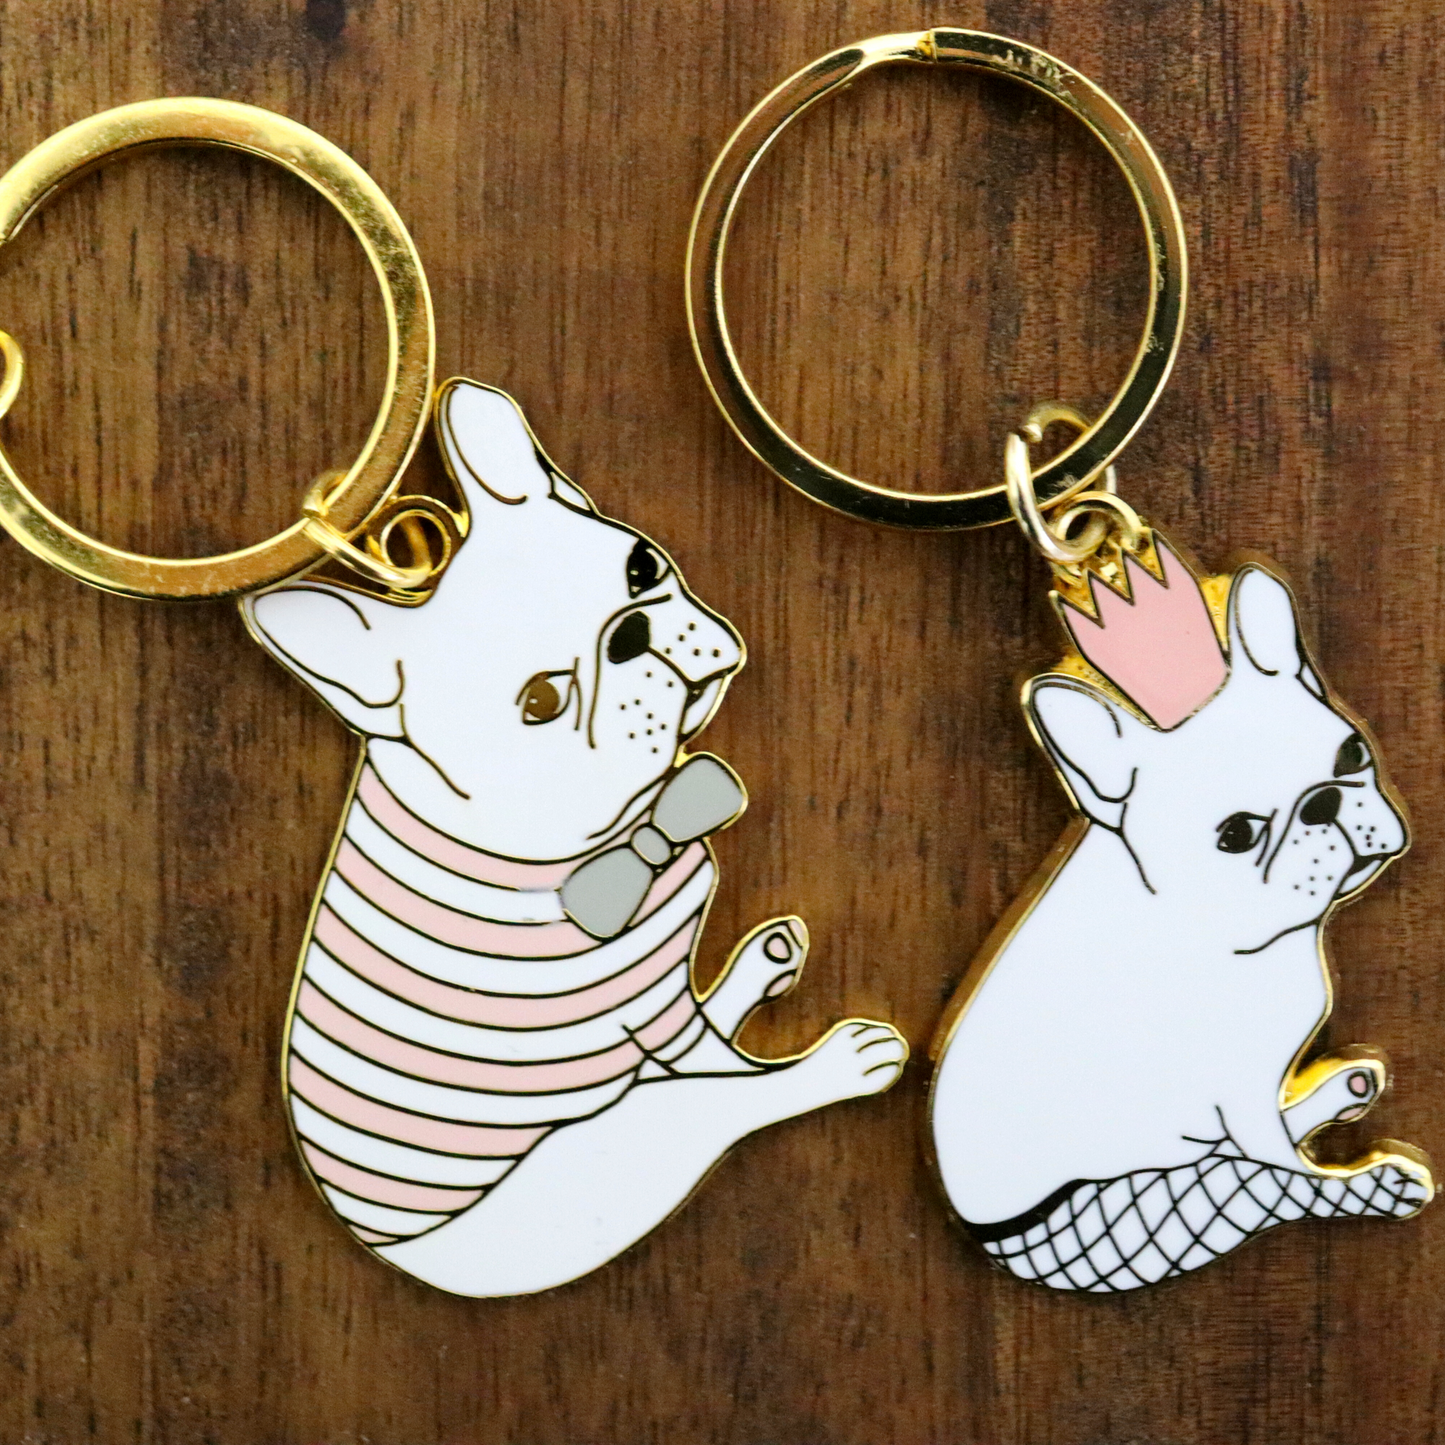 French Bulldog & Love Heart Keychain - Enamel Keyring, Quirky, Pink Striped Tee Frenchie with Bow